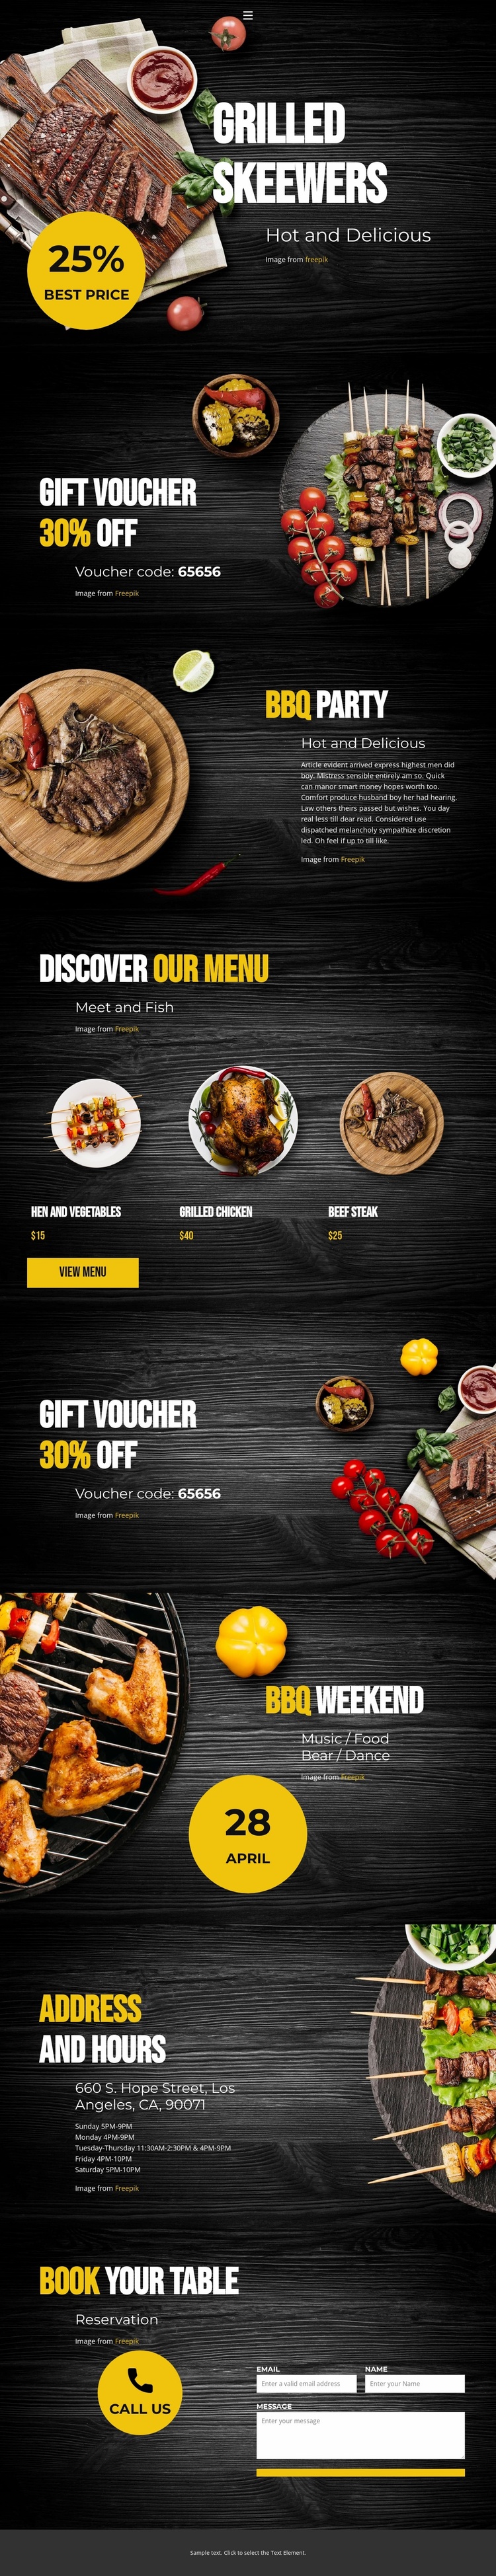 Grilled skeewers eCommerce Template